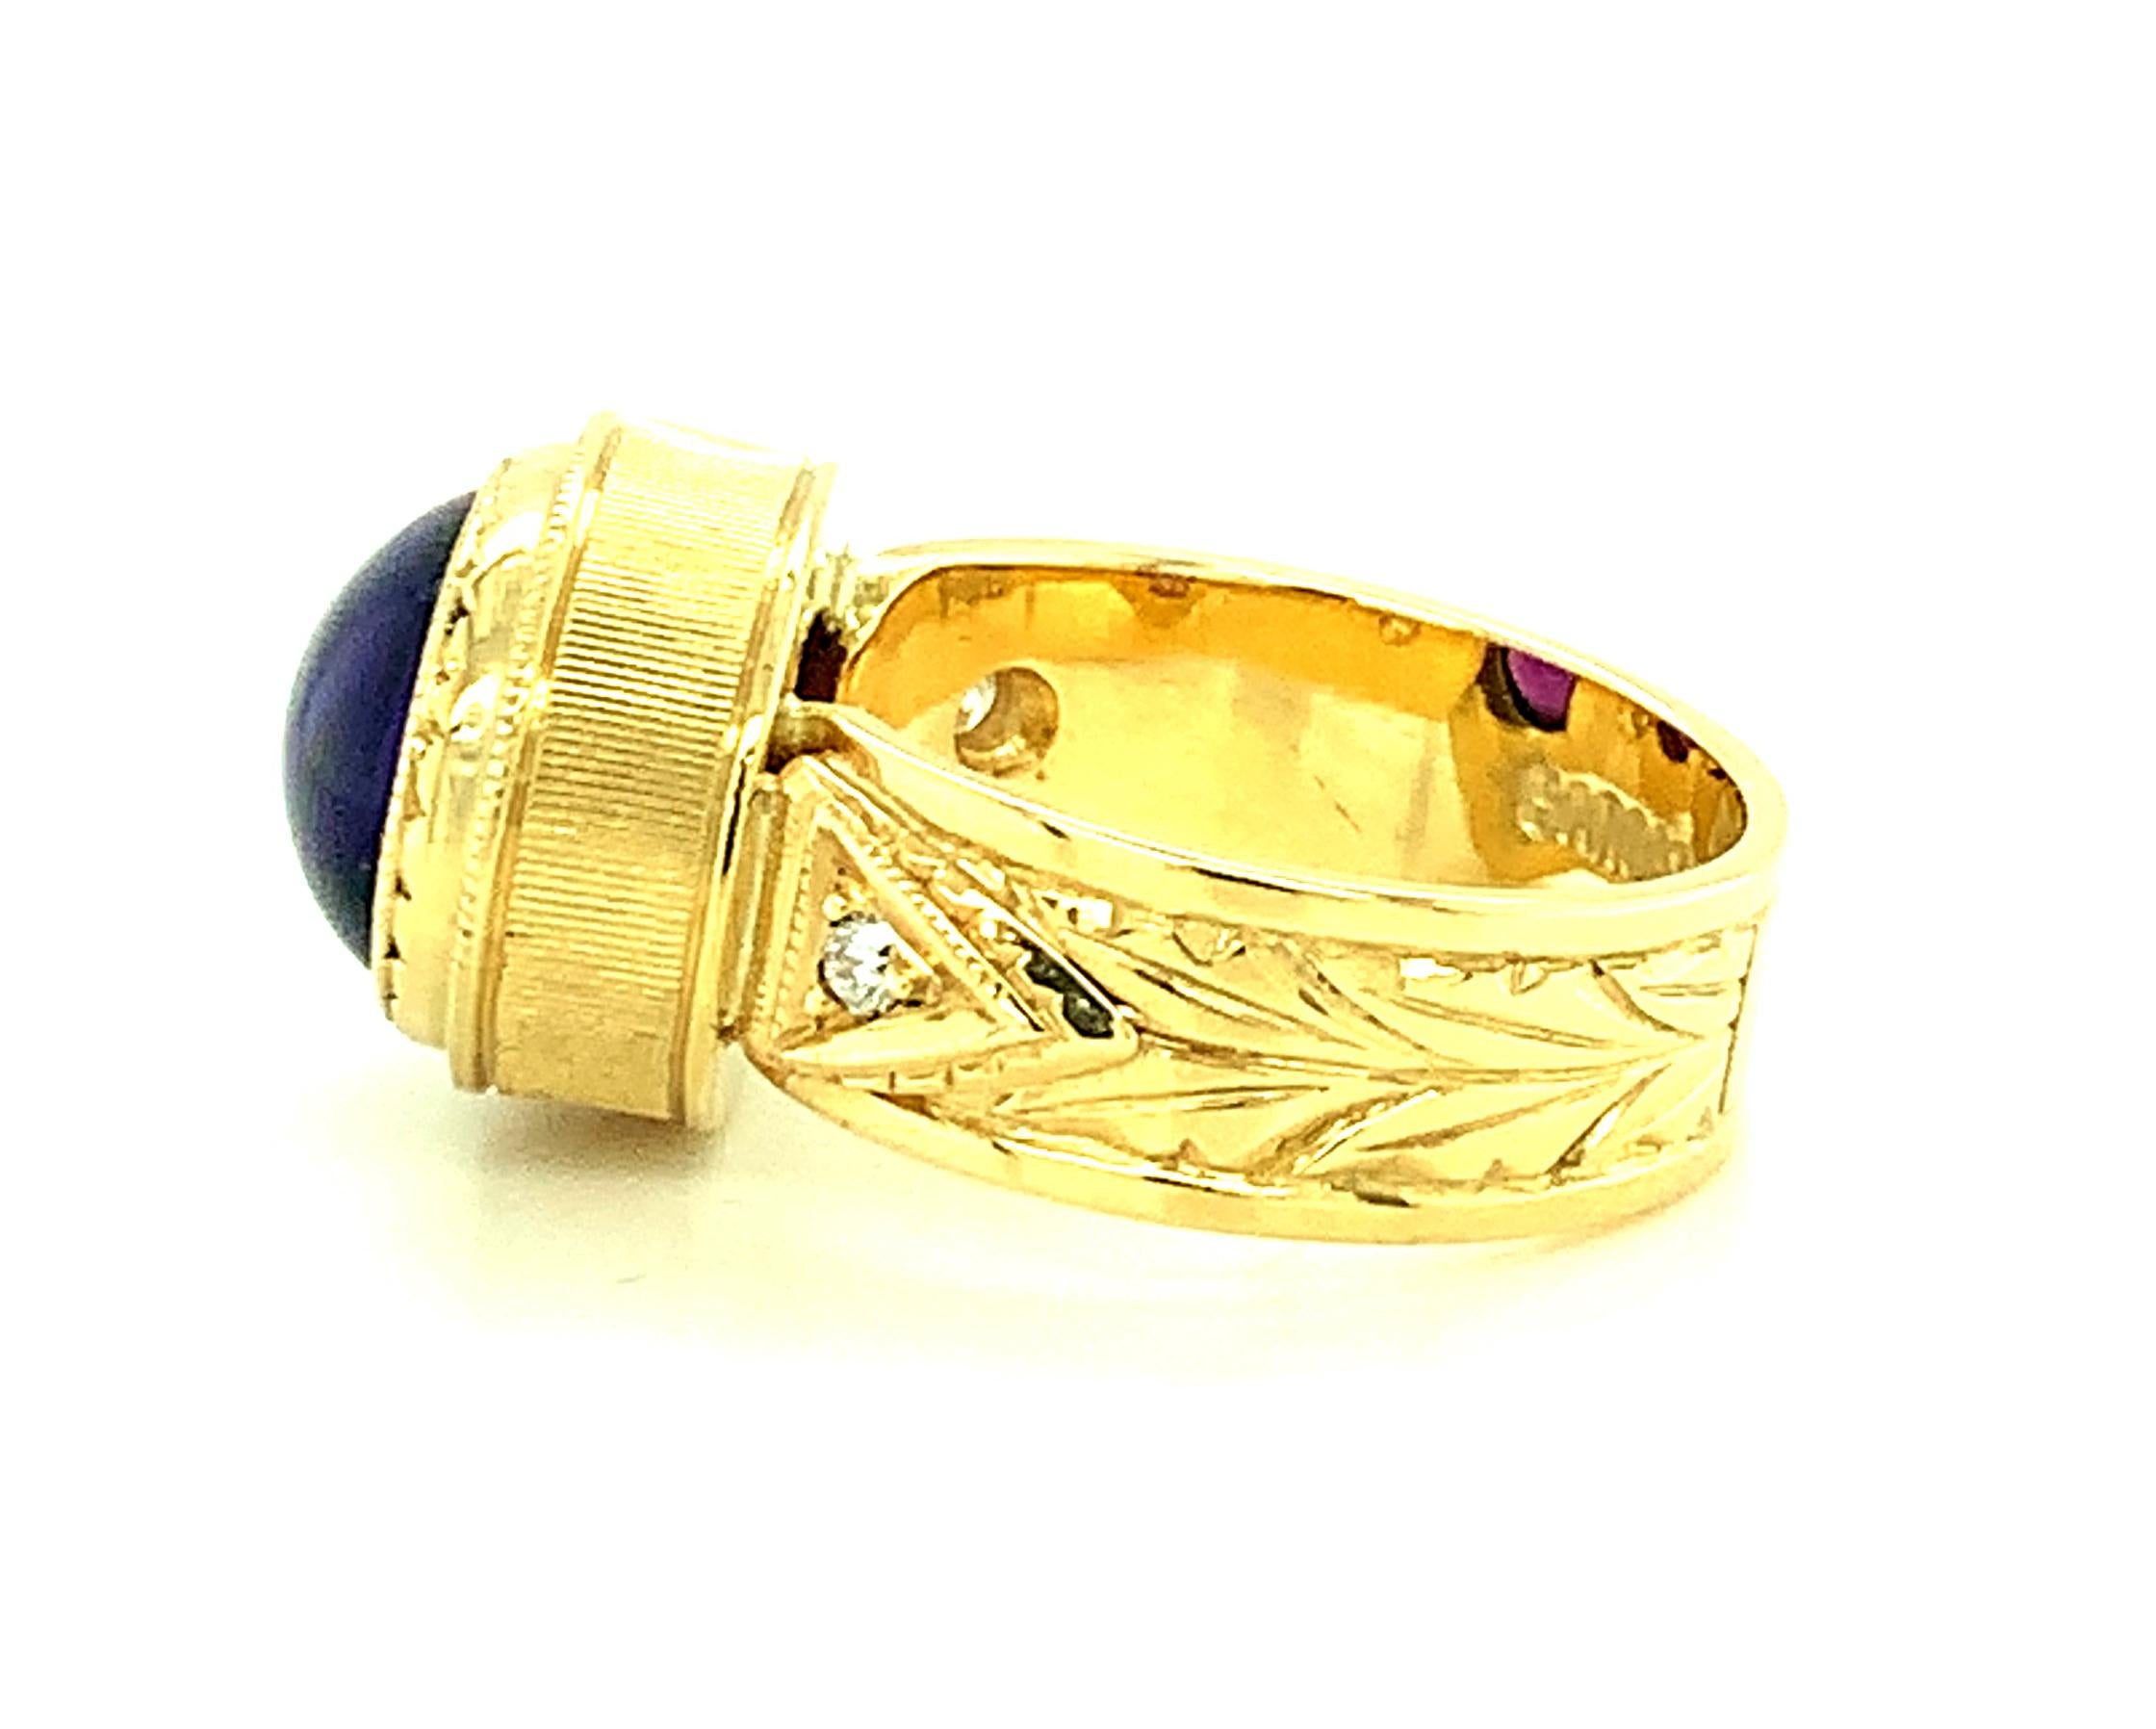 Amethyst Cabochon and Diamond Dome Ring in 18k Yellow Gold, 4.53 Carats For Sale 1